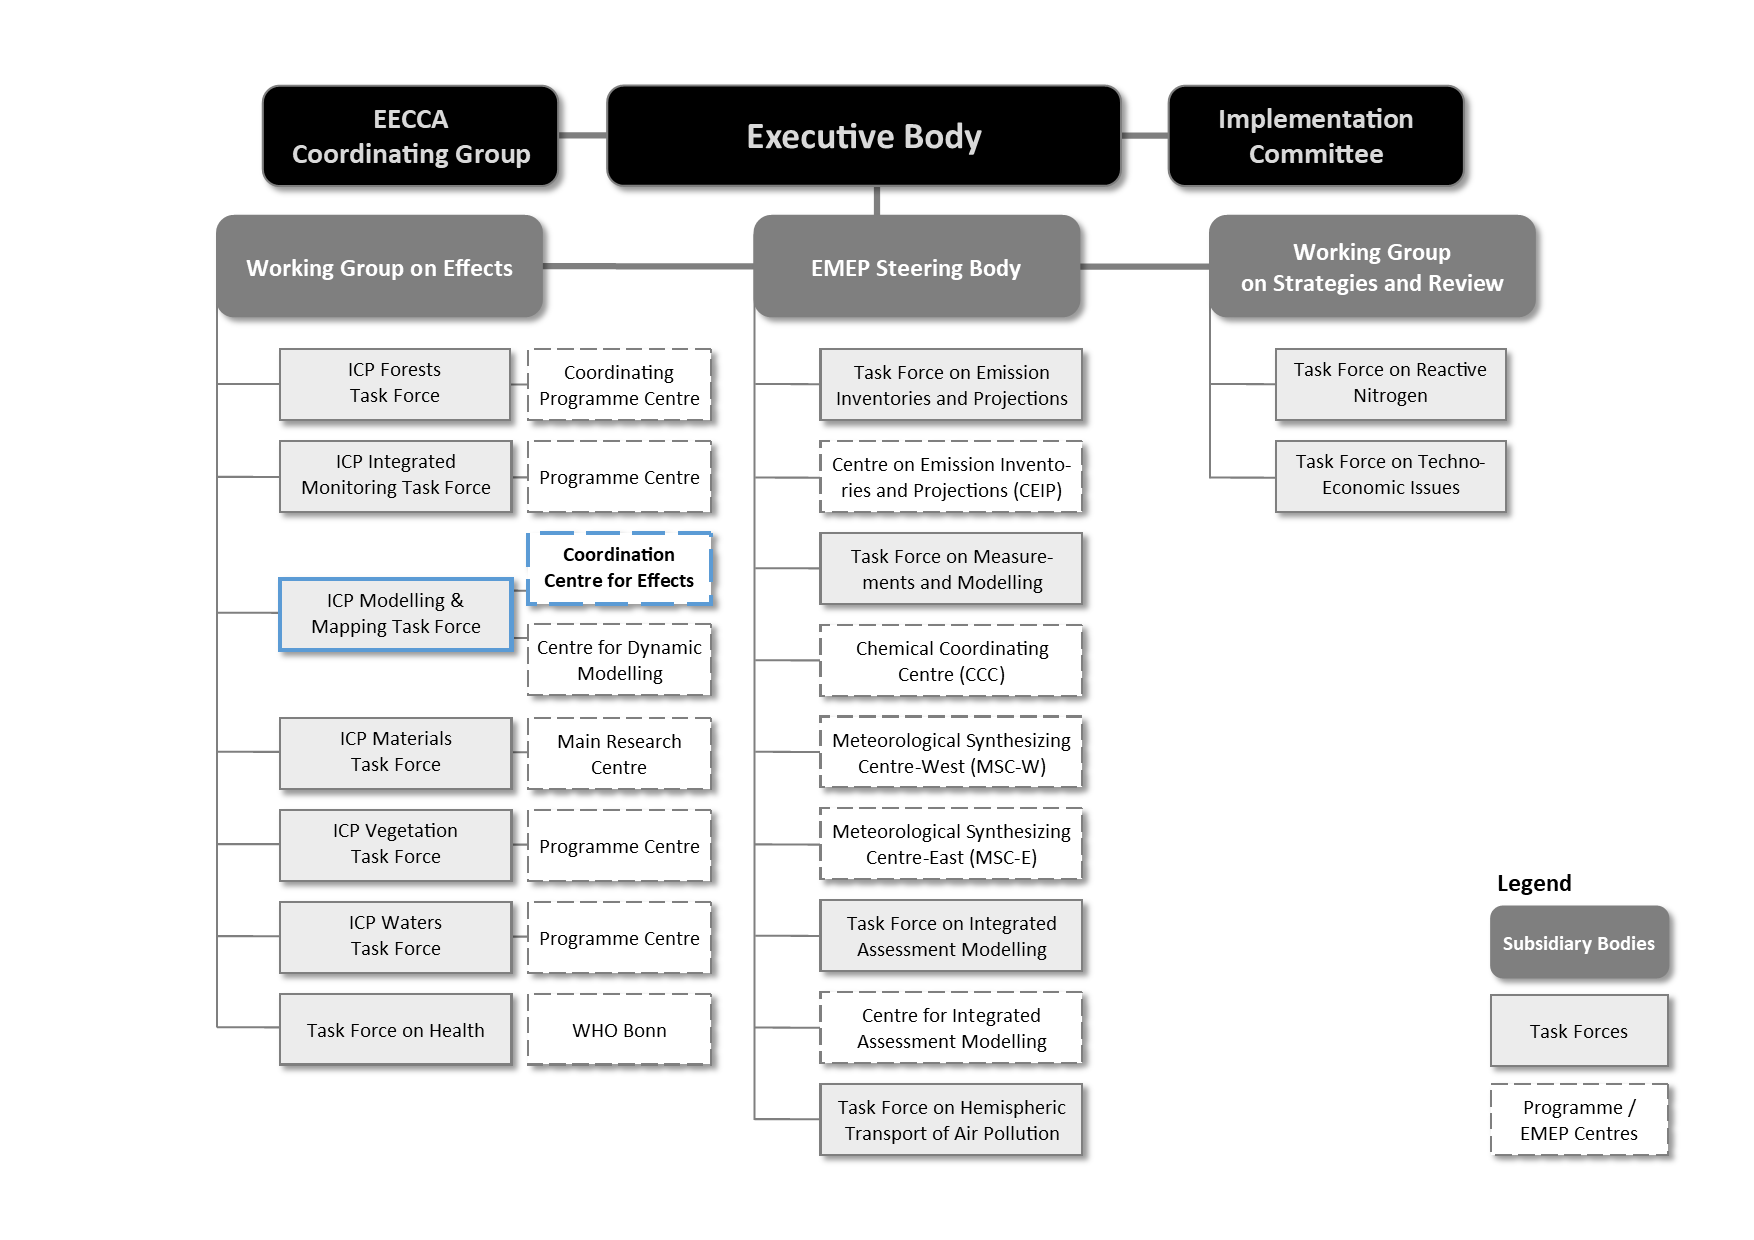 Organizational Chart of the Convention on Long-range Transboundary Air Pollution (CLRTAP)